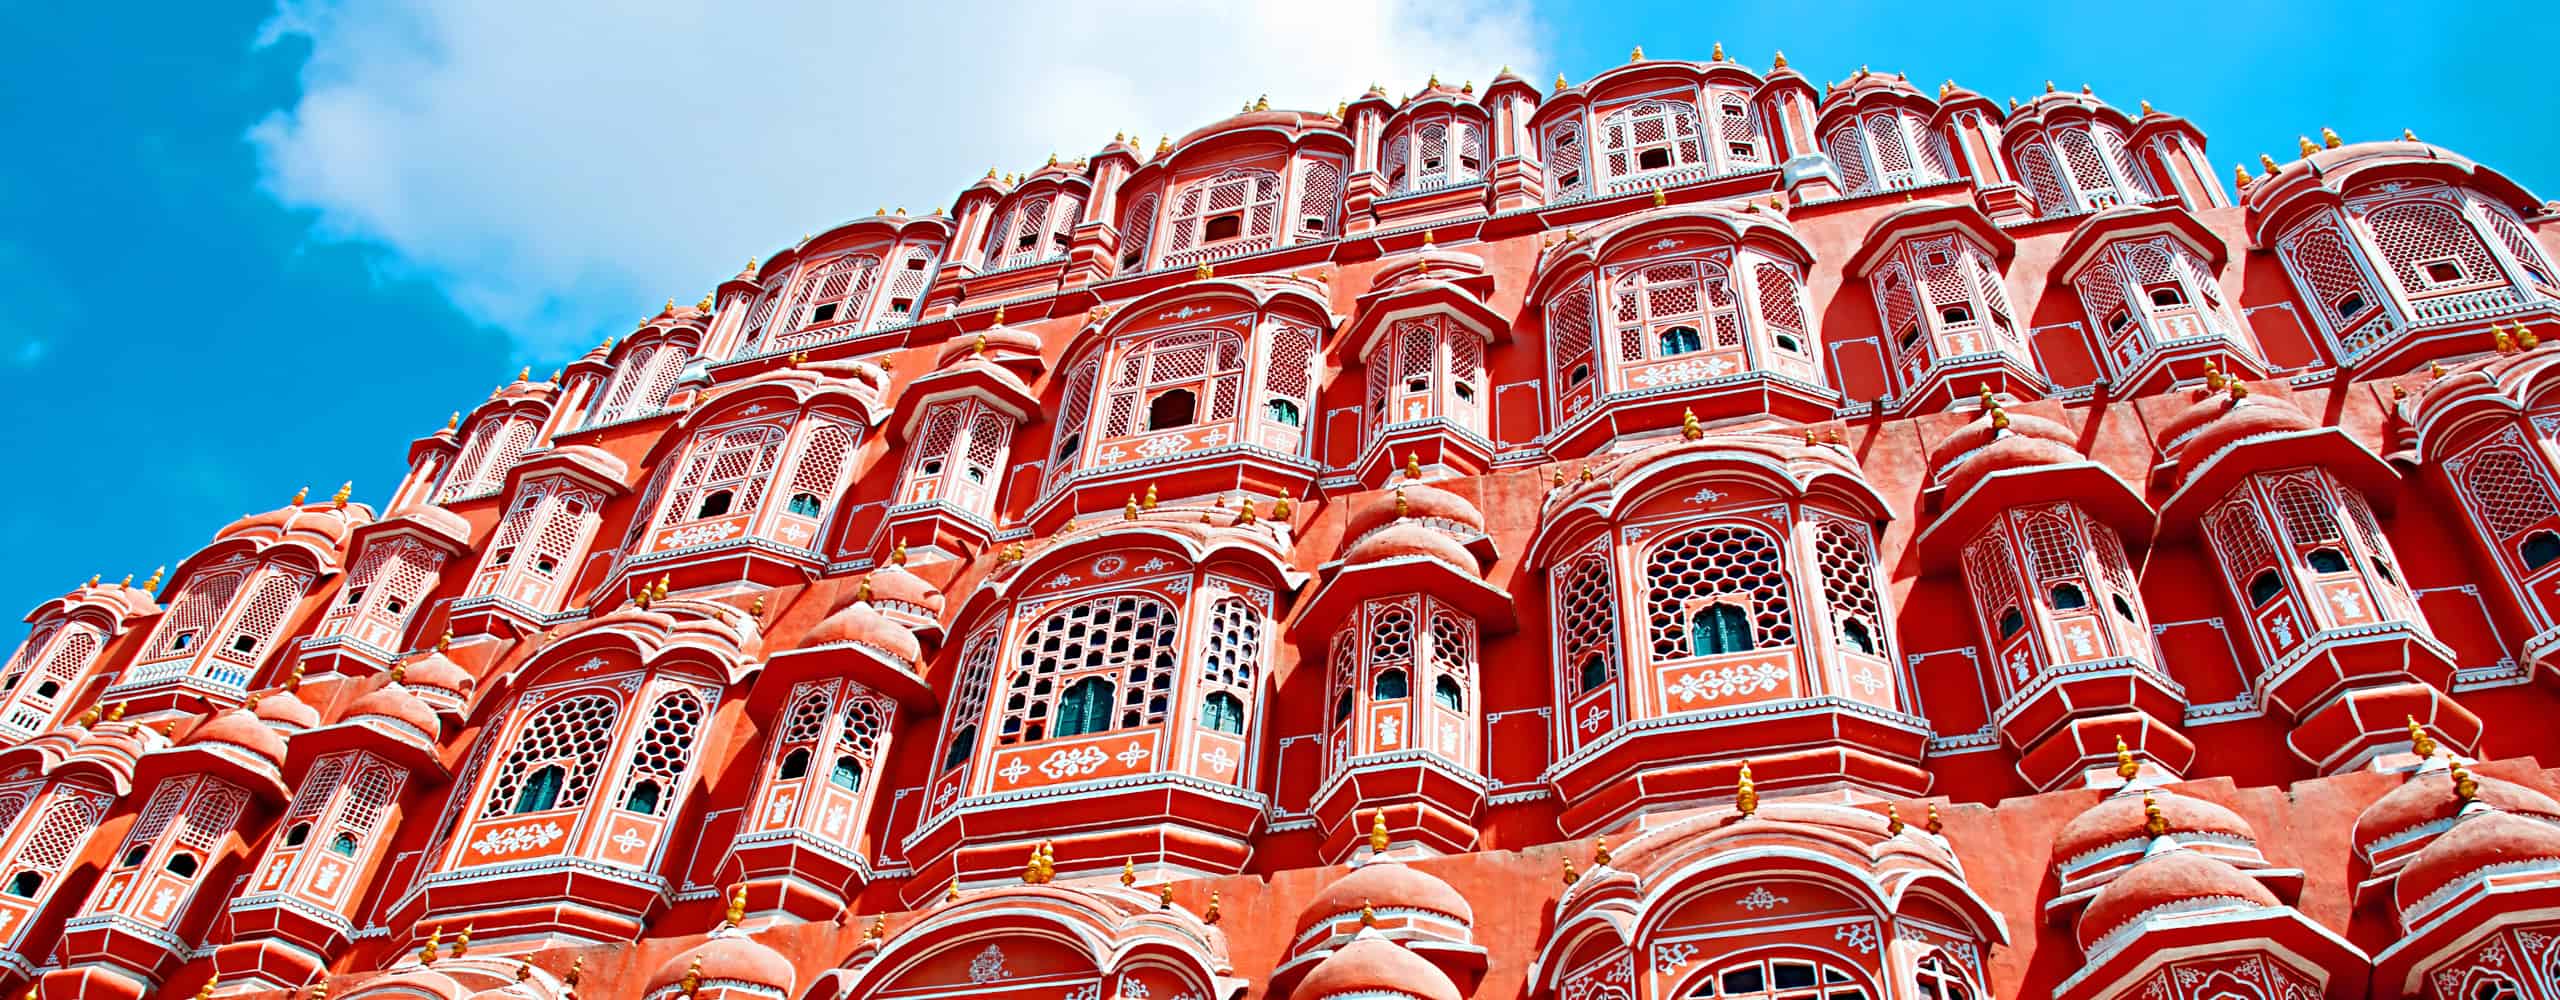 Palace Of The Winds In Jaipur, India